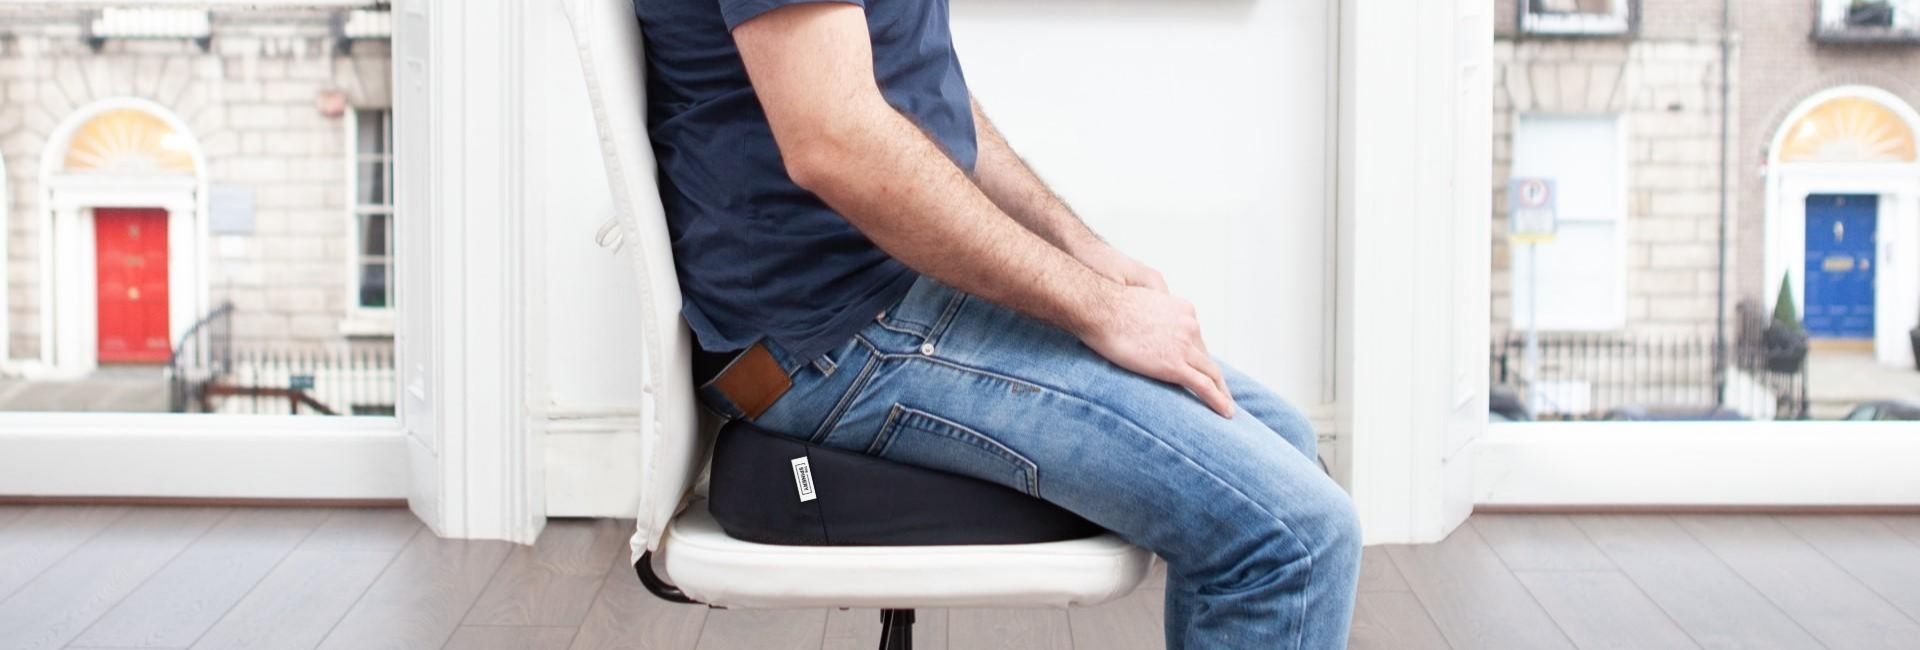 seat cushion for posture